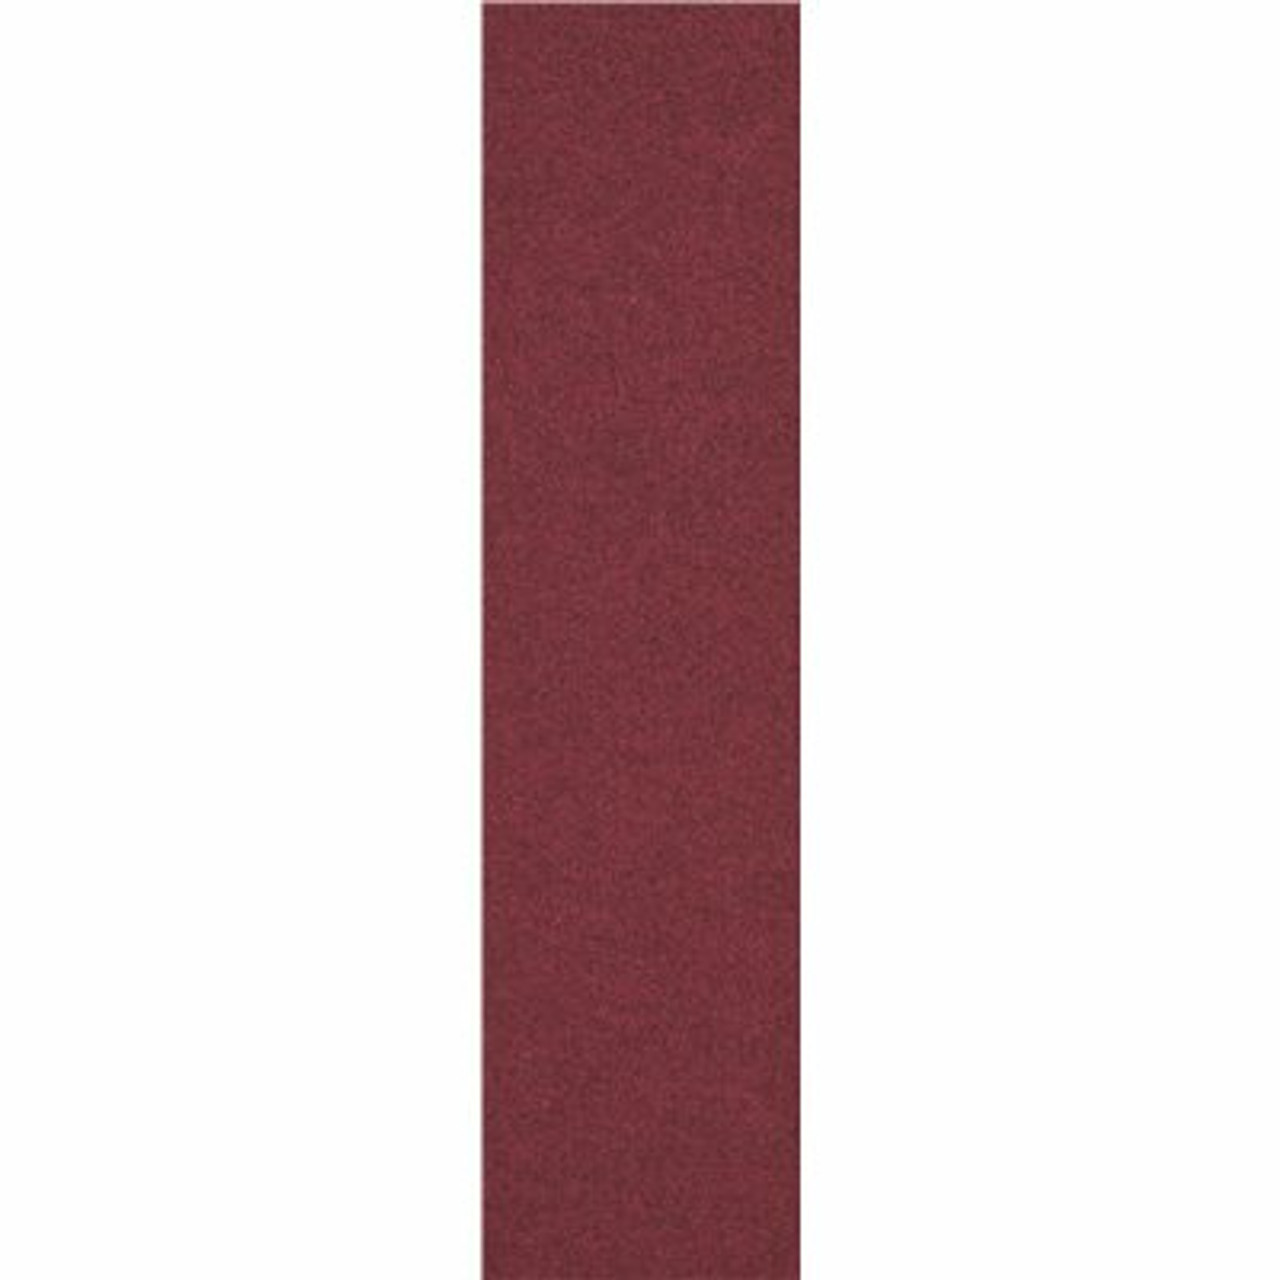 Foss Peel And Stick Color Accents Sangria 24 In. X 24 In. Residential Carpet Tile (8-Tile / Case)